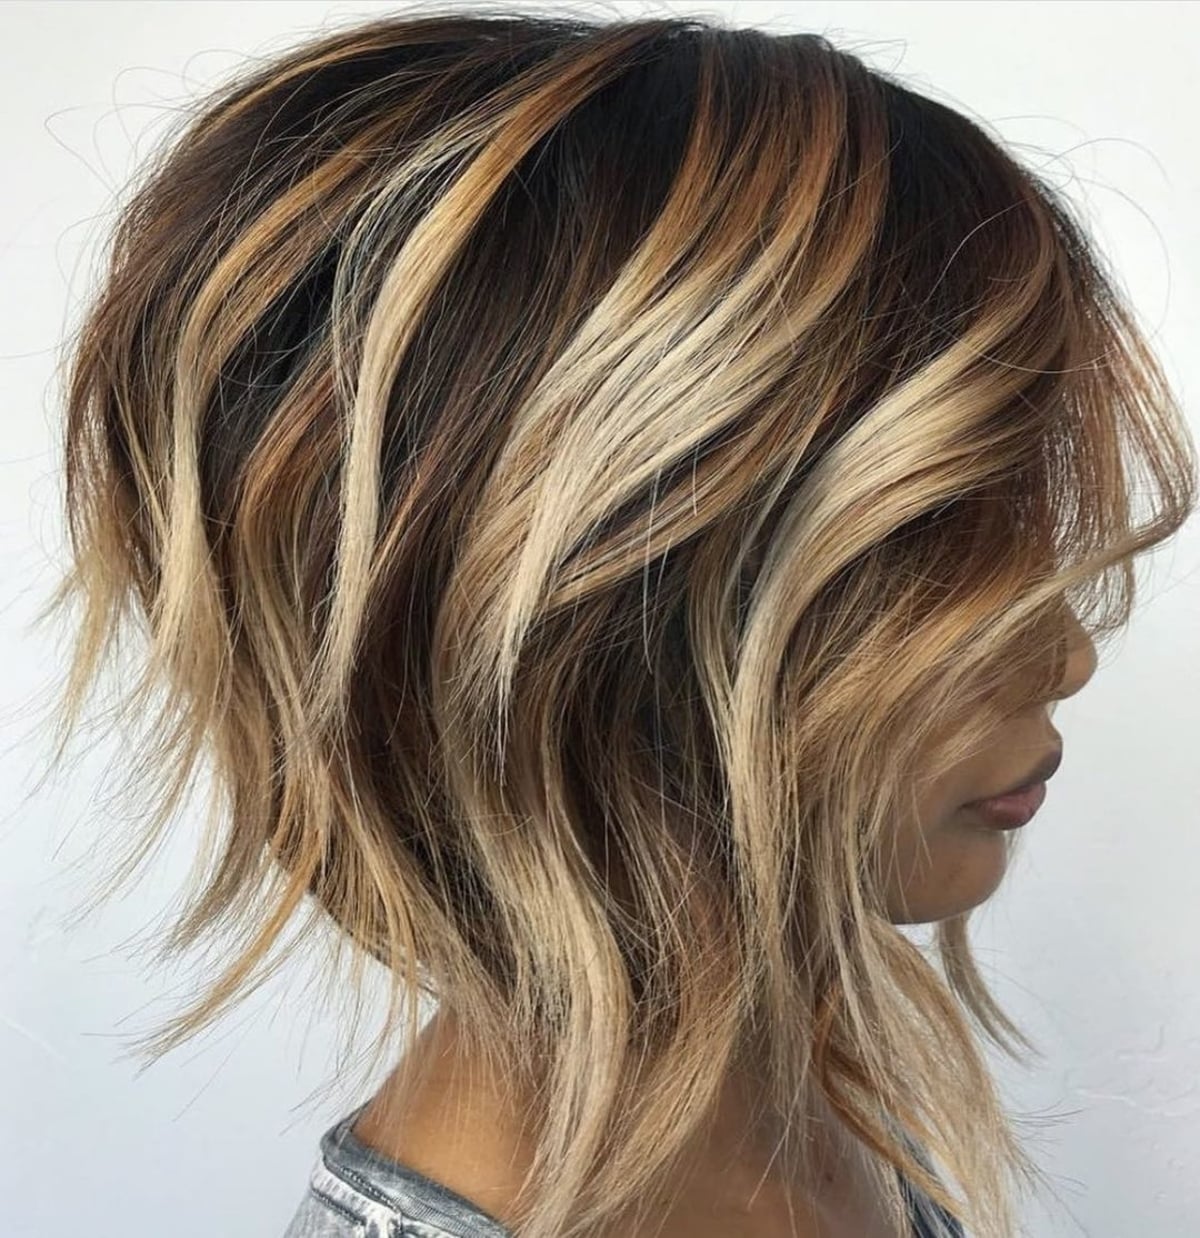 Short angled haircut with wavy stacked layers